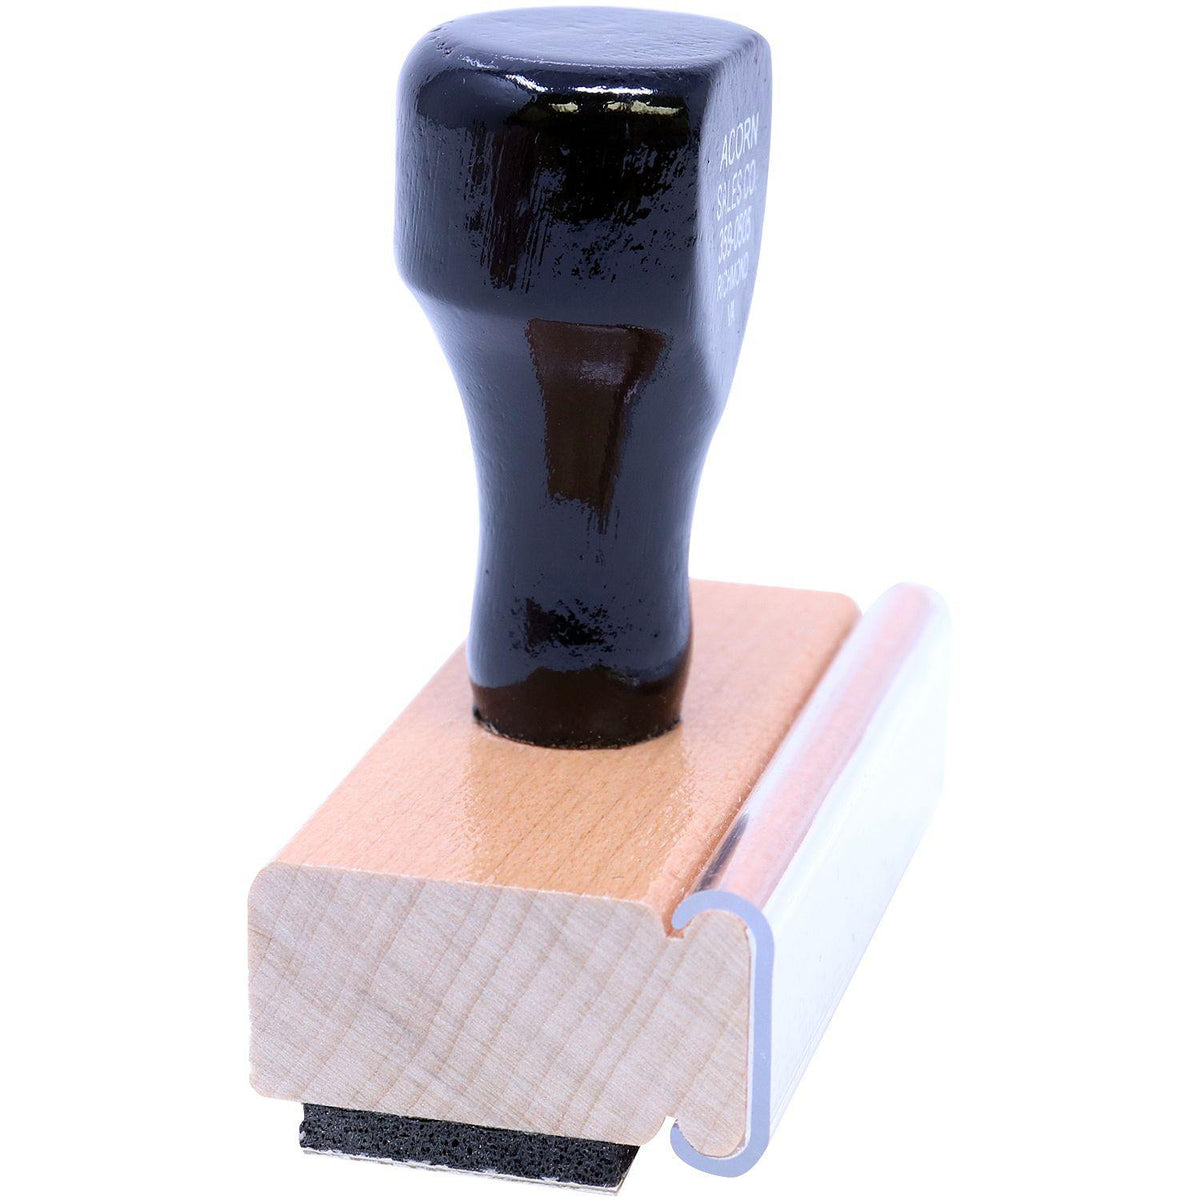 Side View of Large Lower Case First Class Rubber Stamp at an Angle